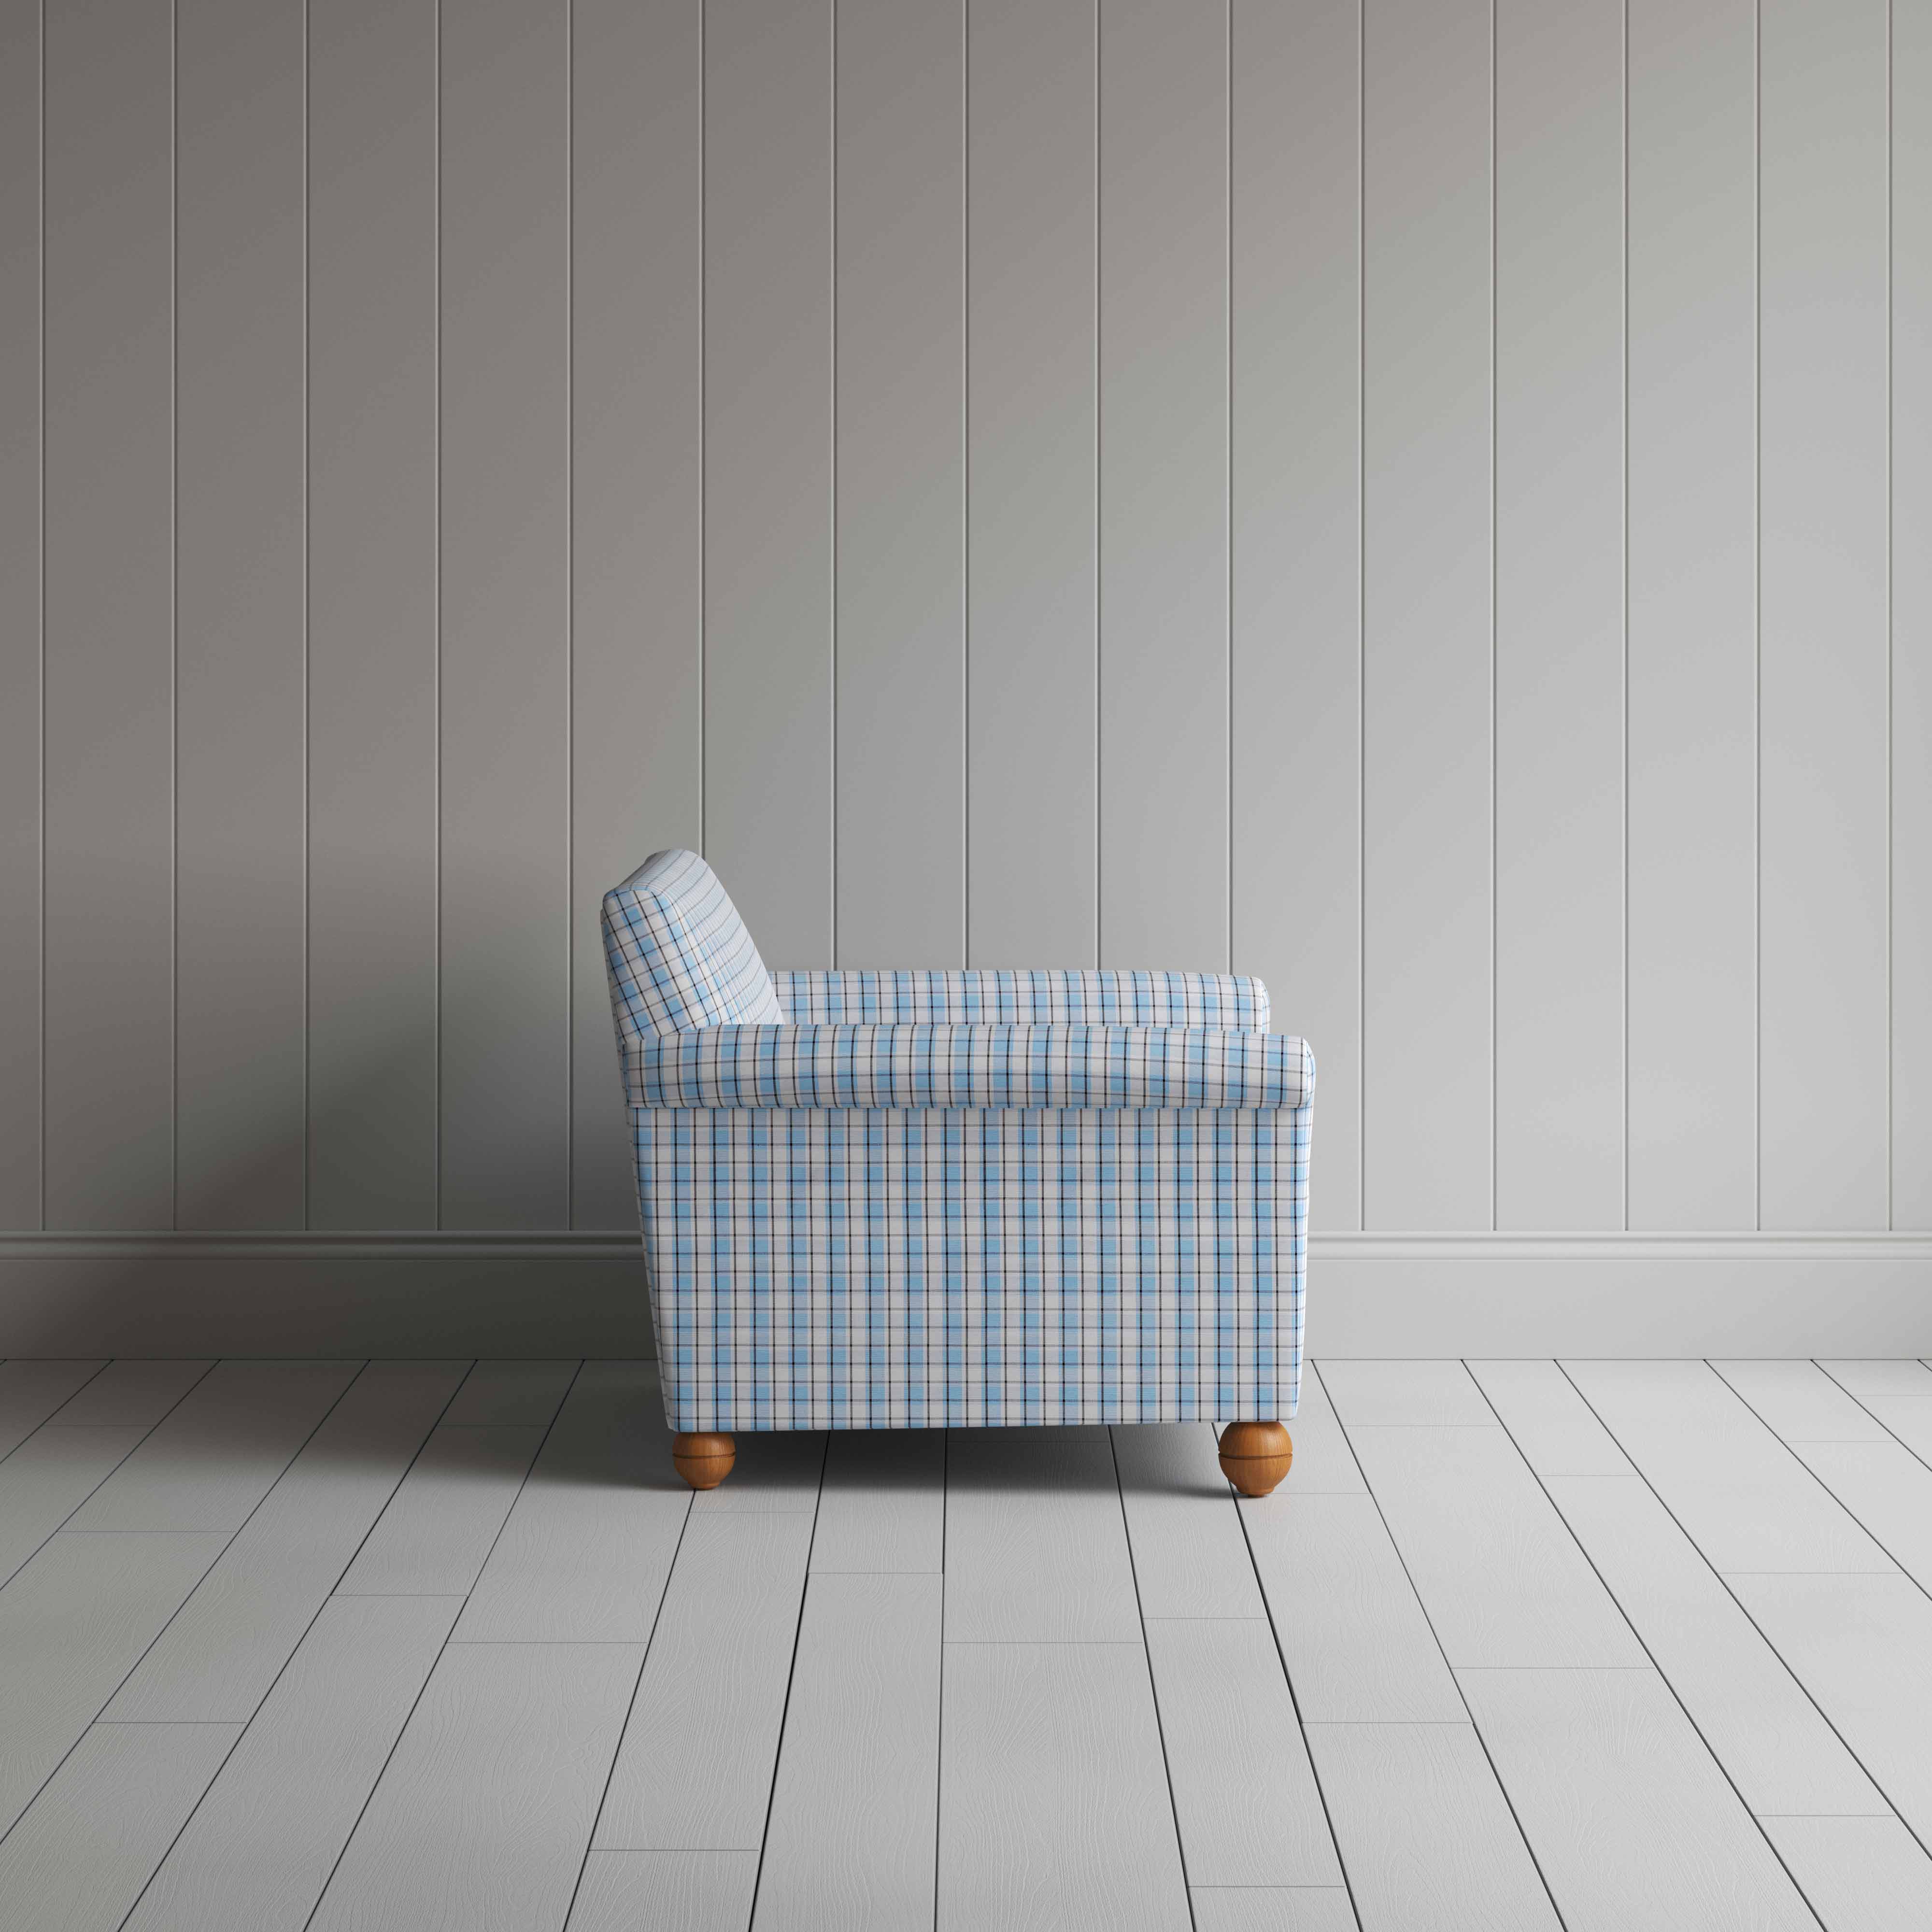  Idler Love Seat in Square Deal Cotton, Blue Brown 